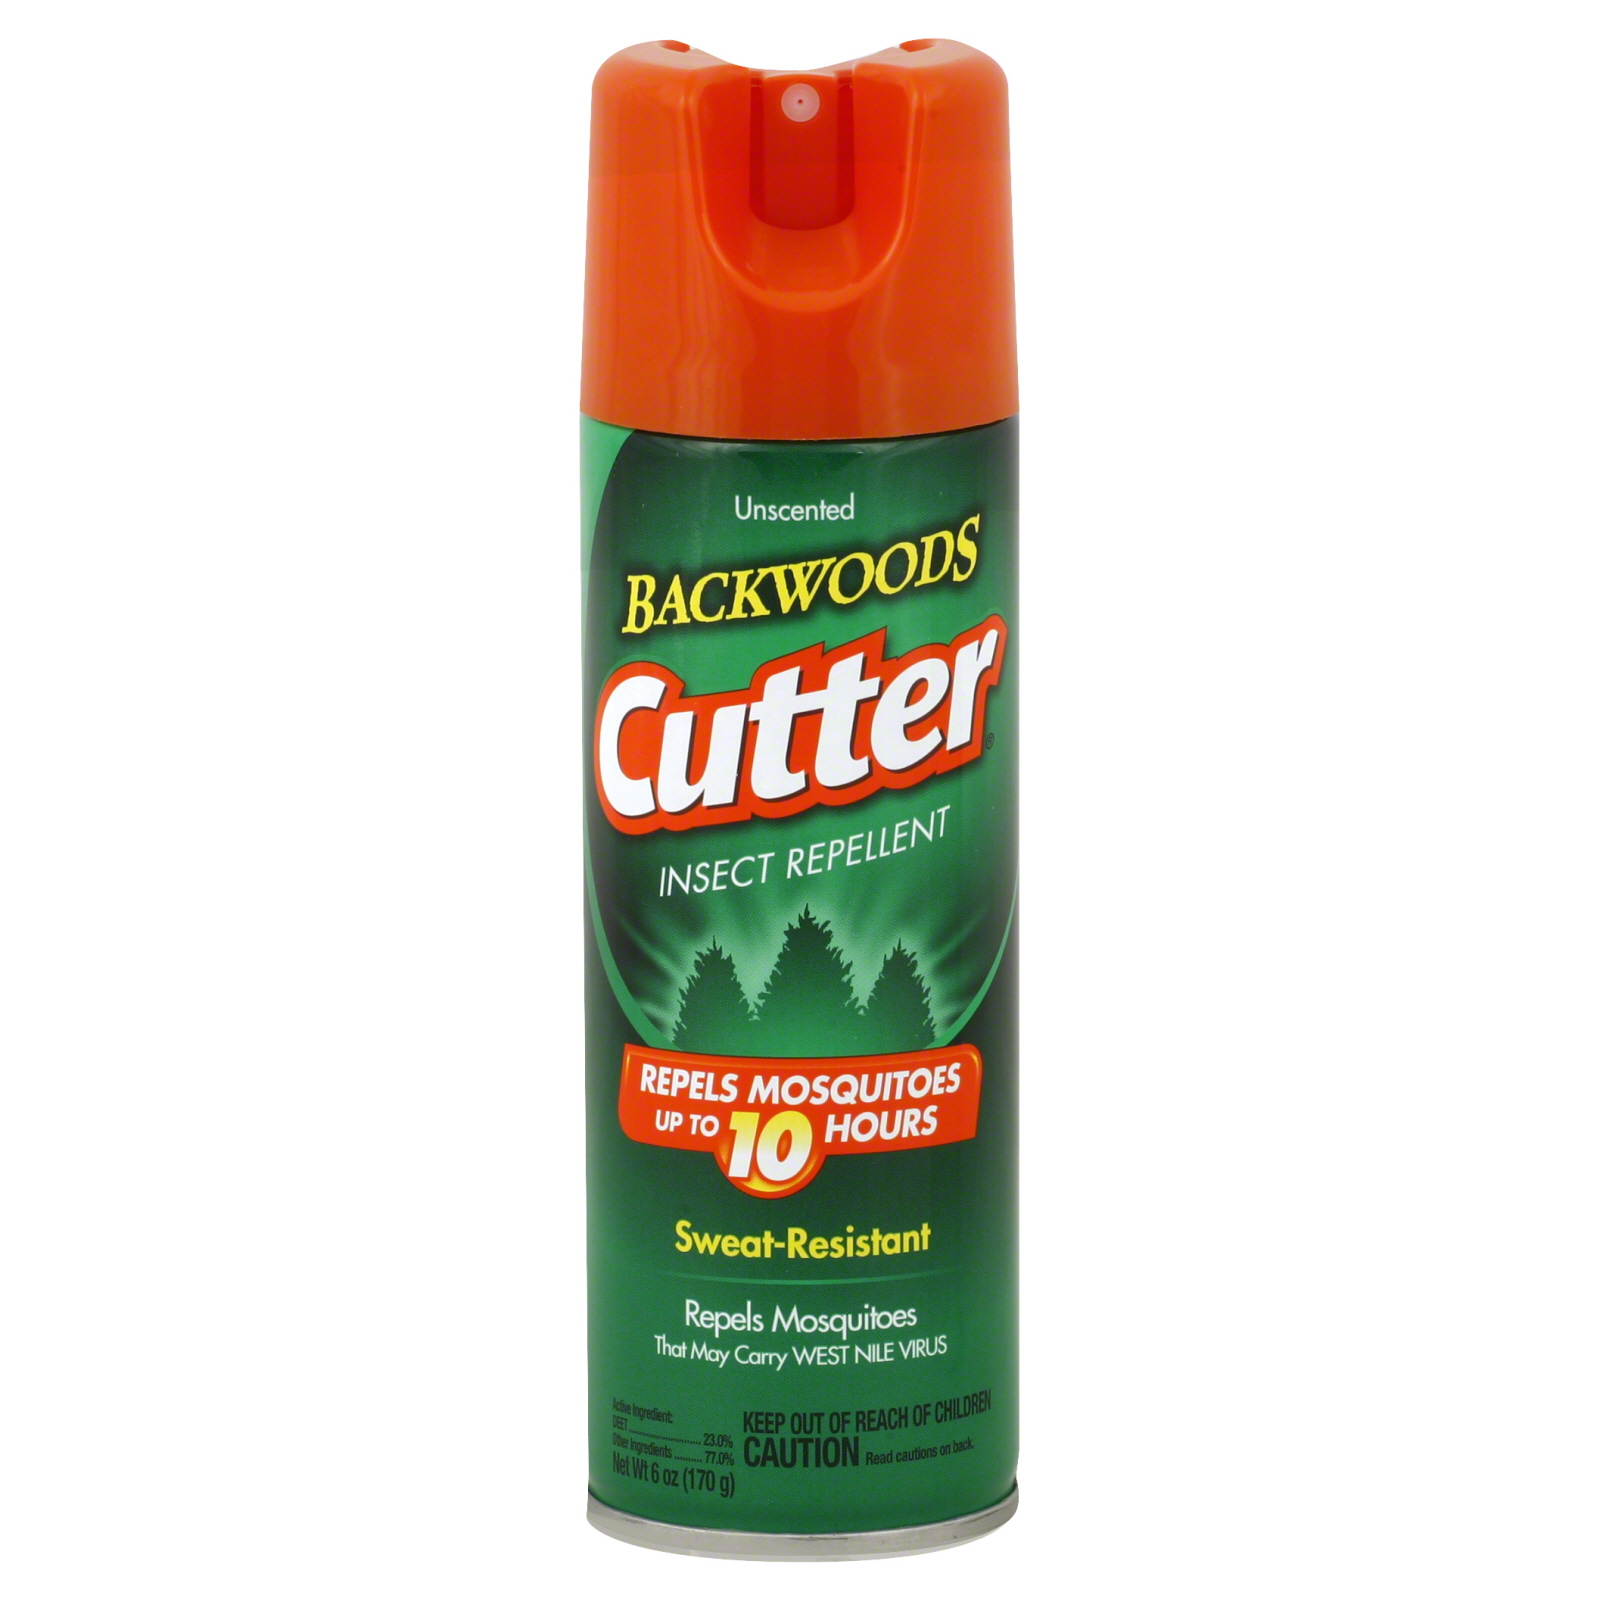 Also protects. Insect Repellent. Cutter Backwoods. Cutter Backwoods спрей от насекомых. Gutter Backwoods спрей.